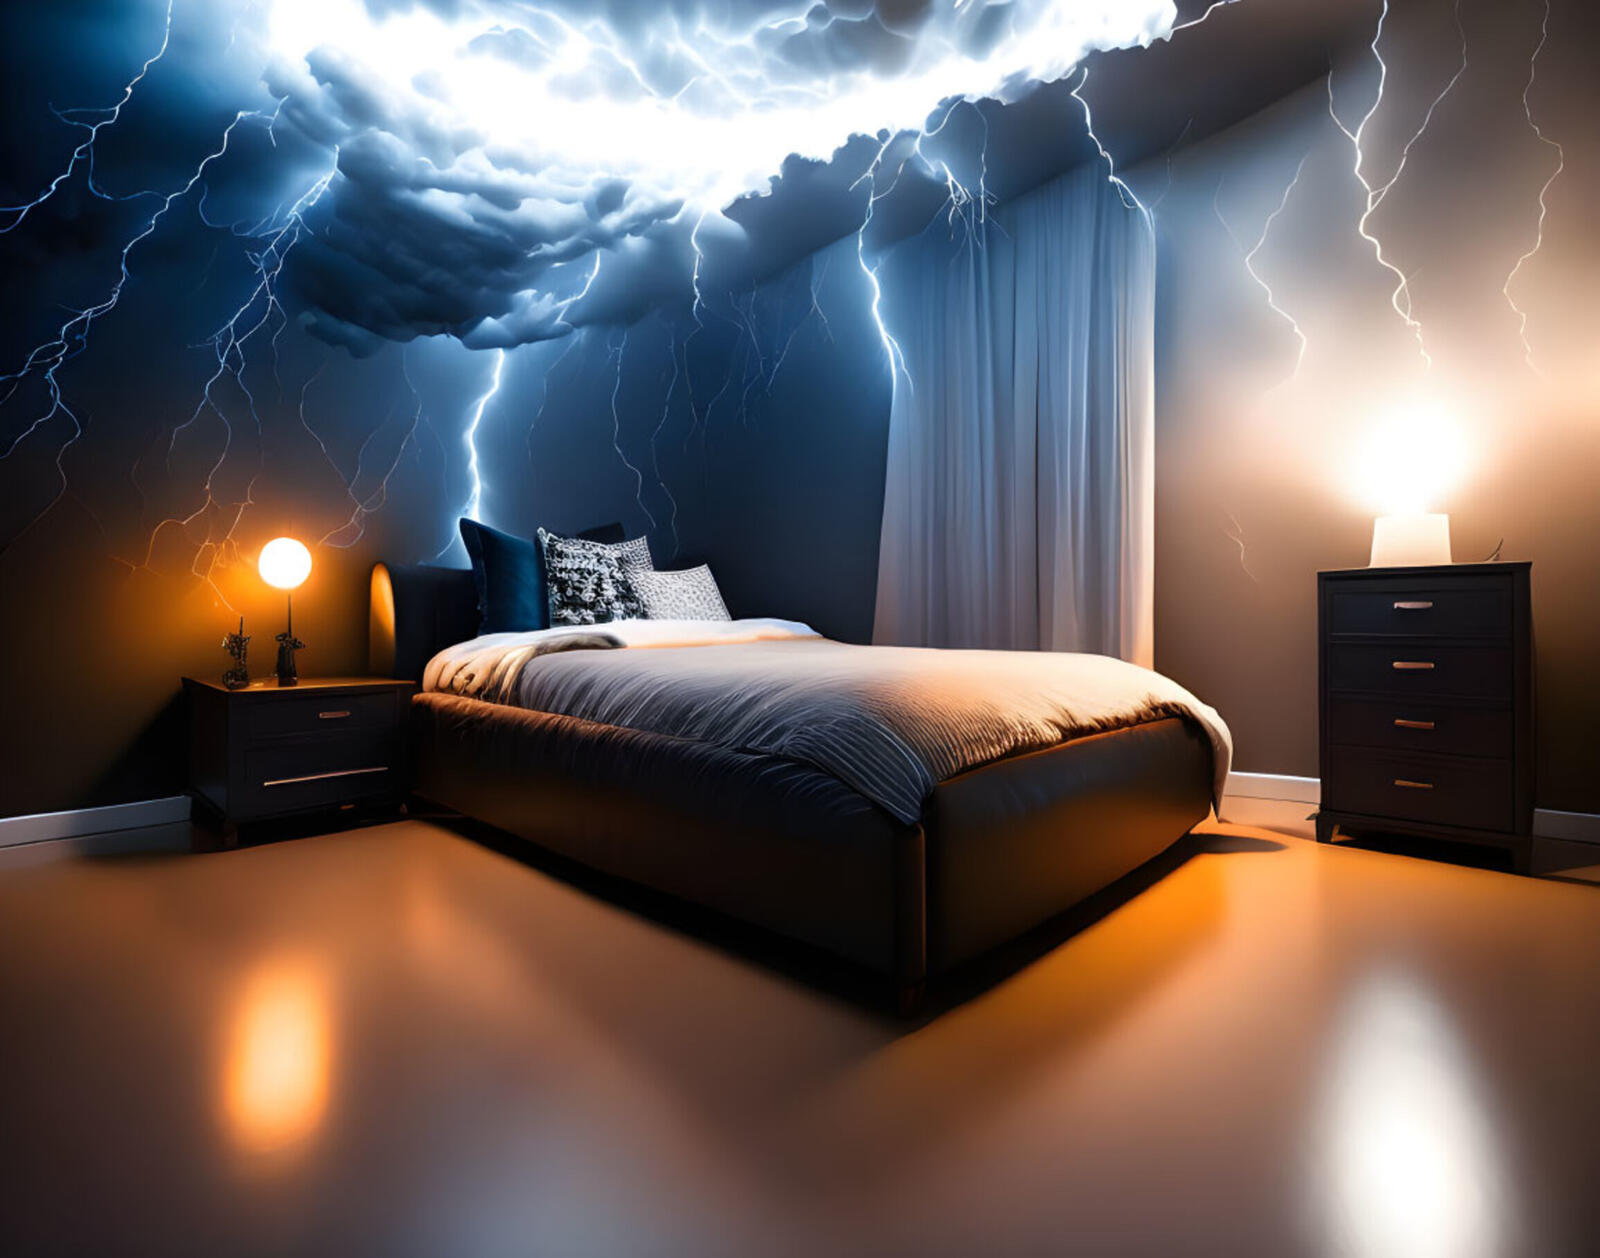 Free photo Thunderclouds in the bedroom above the bed.